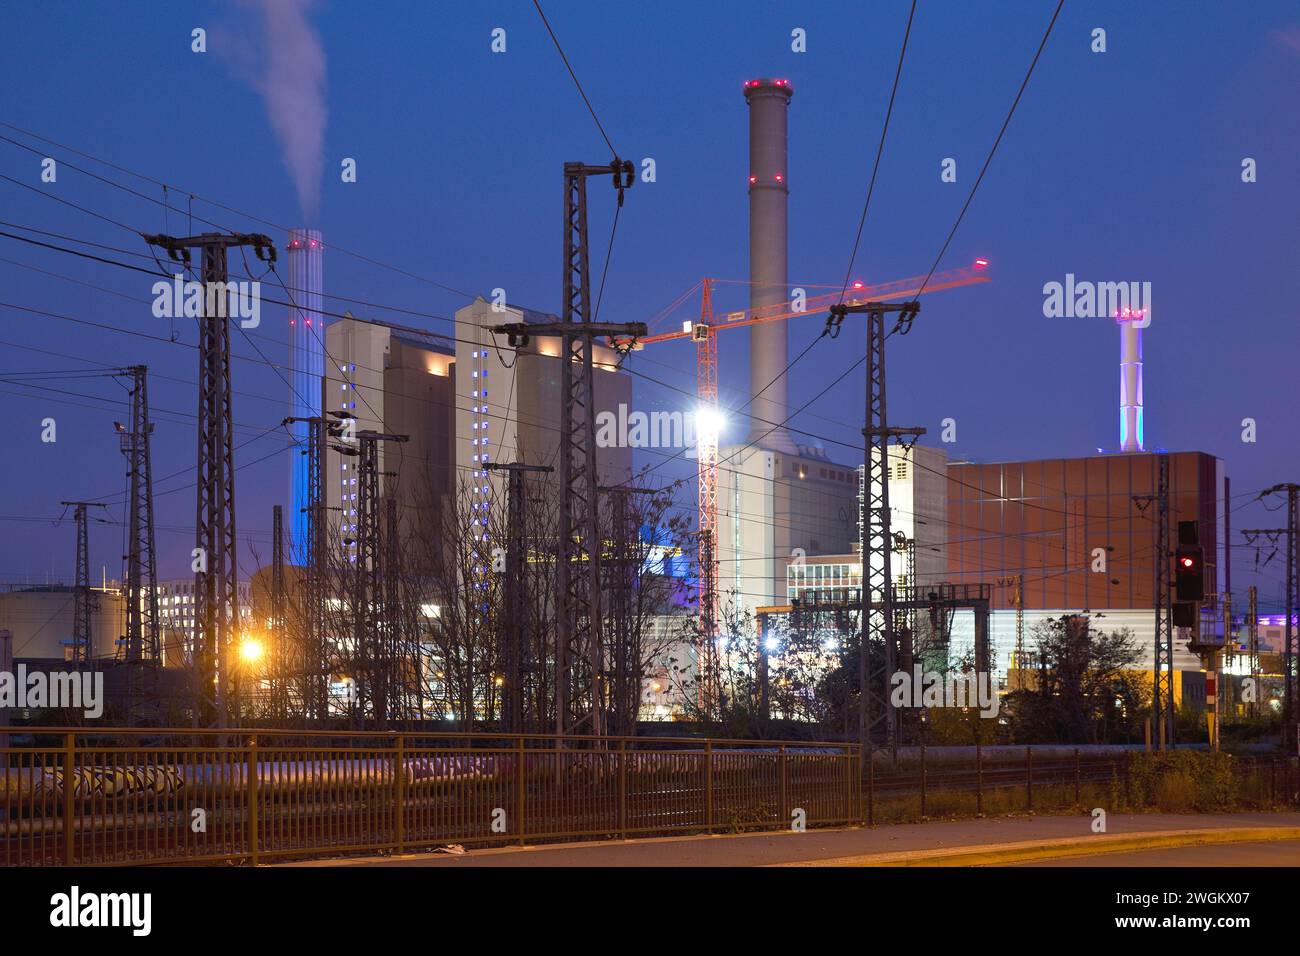 combined heat and power station Mainover in the evening, Germany, Hesse, Frankfurt am Main Stock Photo